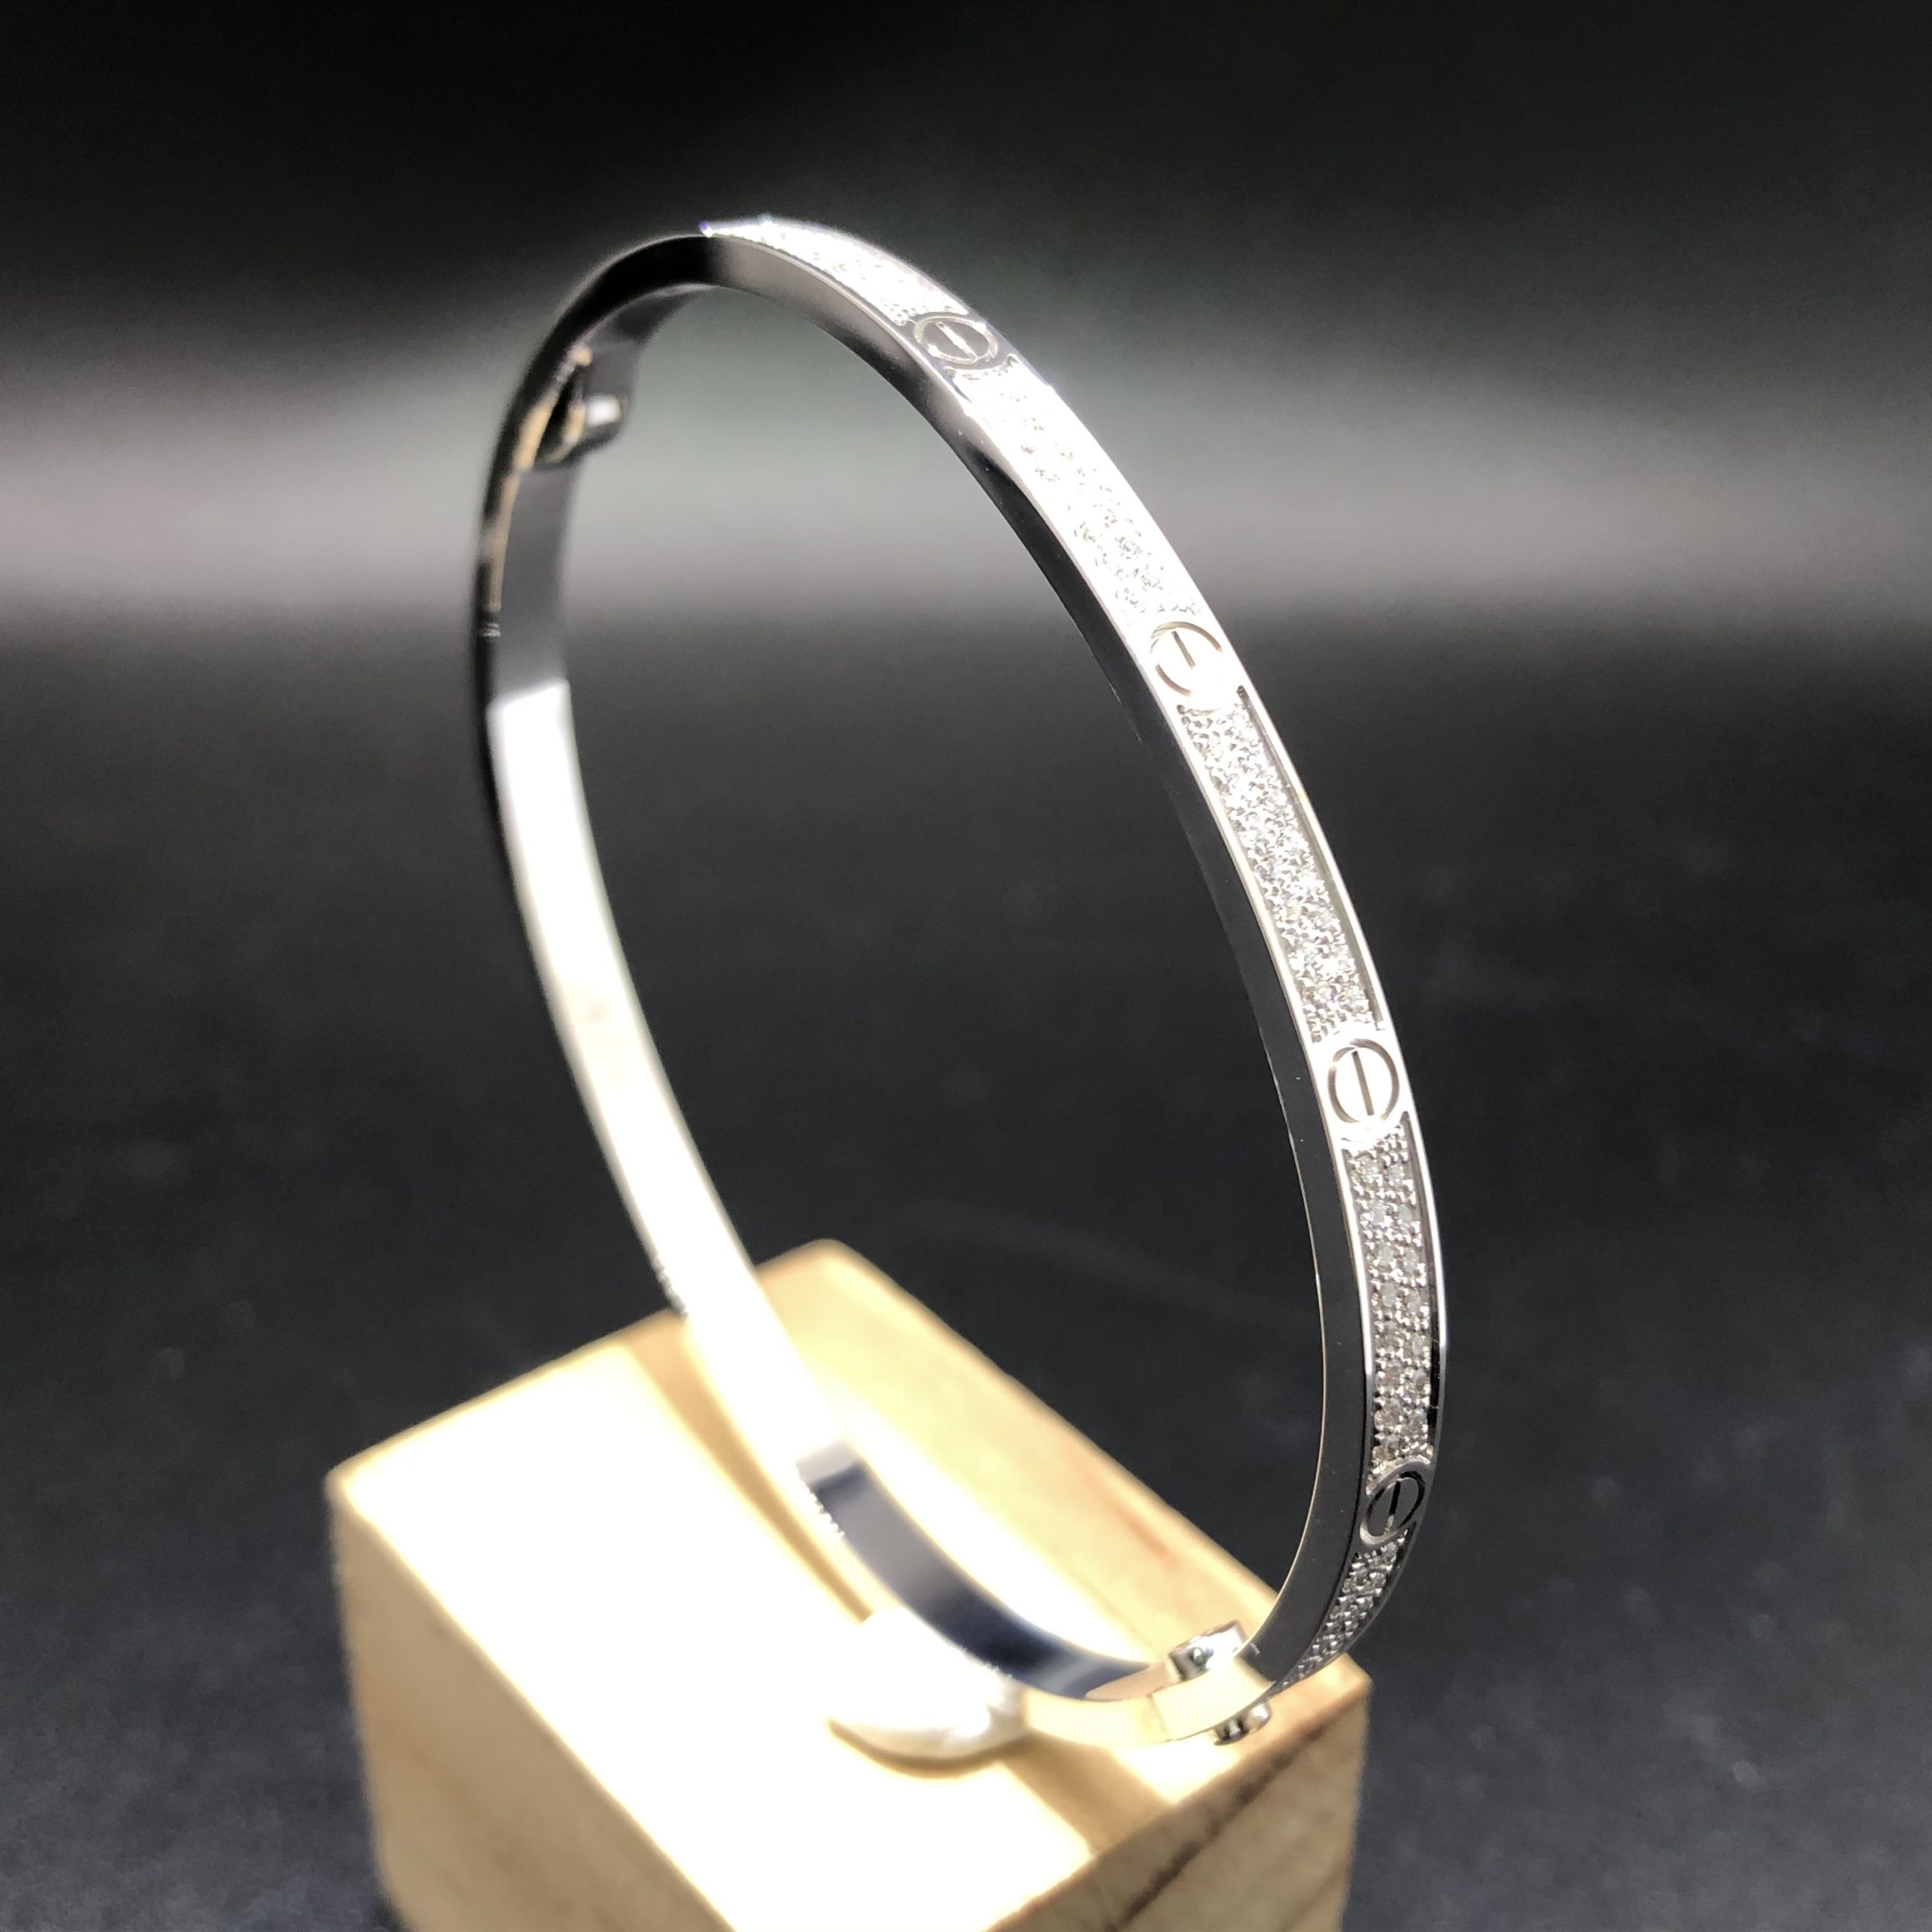 Cartier Love Small Model Bracelet Custom Made in Solid 18K White Gold with Diamonds-paved